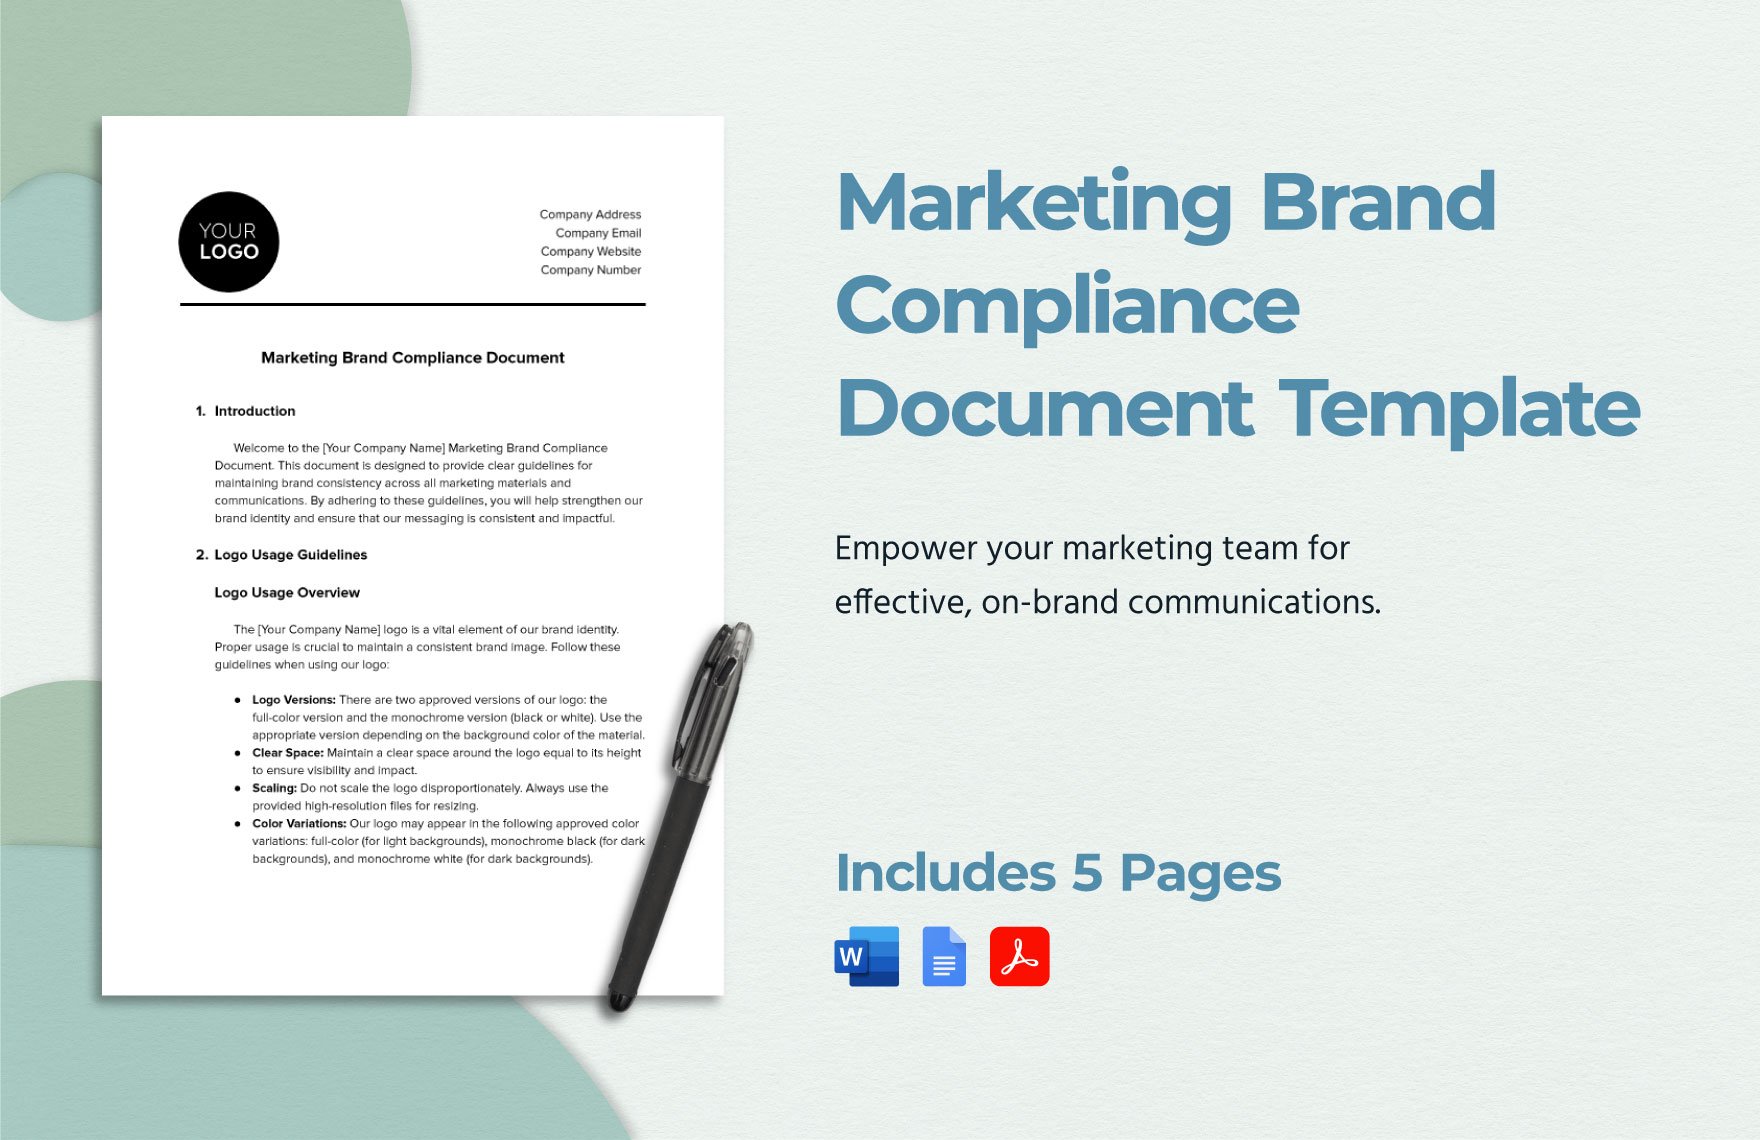 Marketing Brand Compliance Document Template in Word, Google Docs, PDF